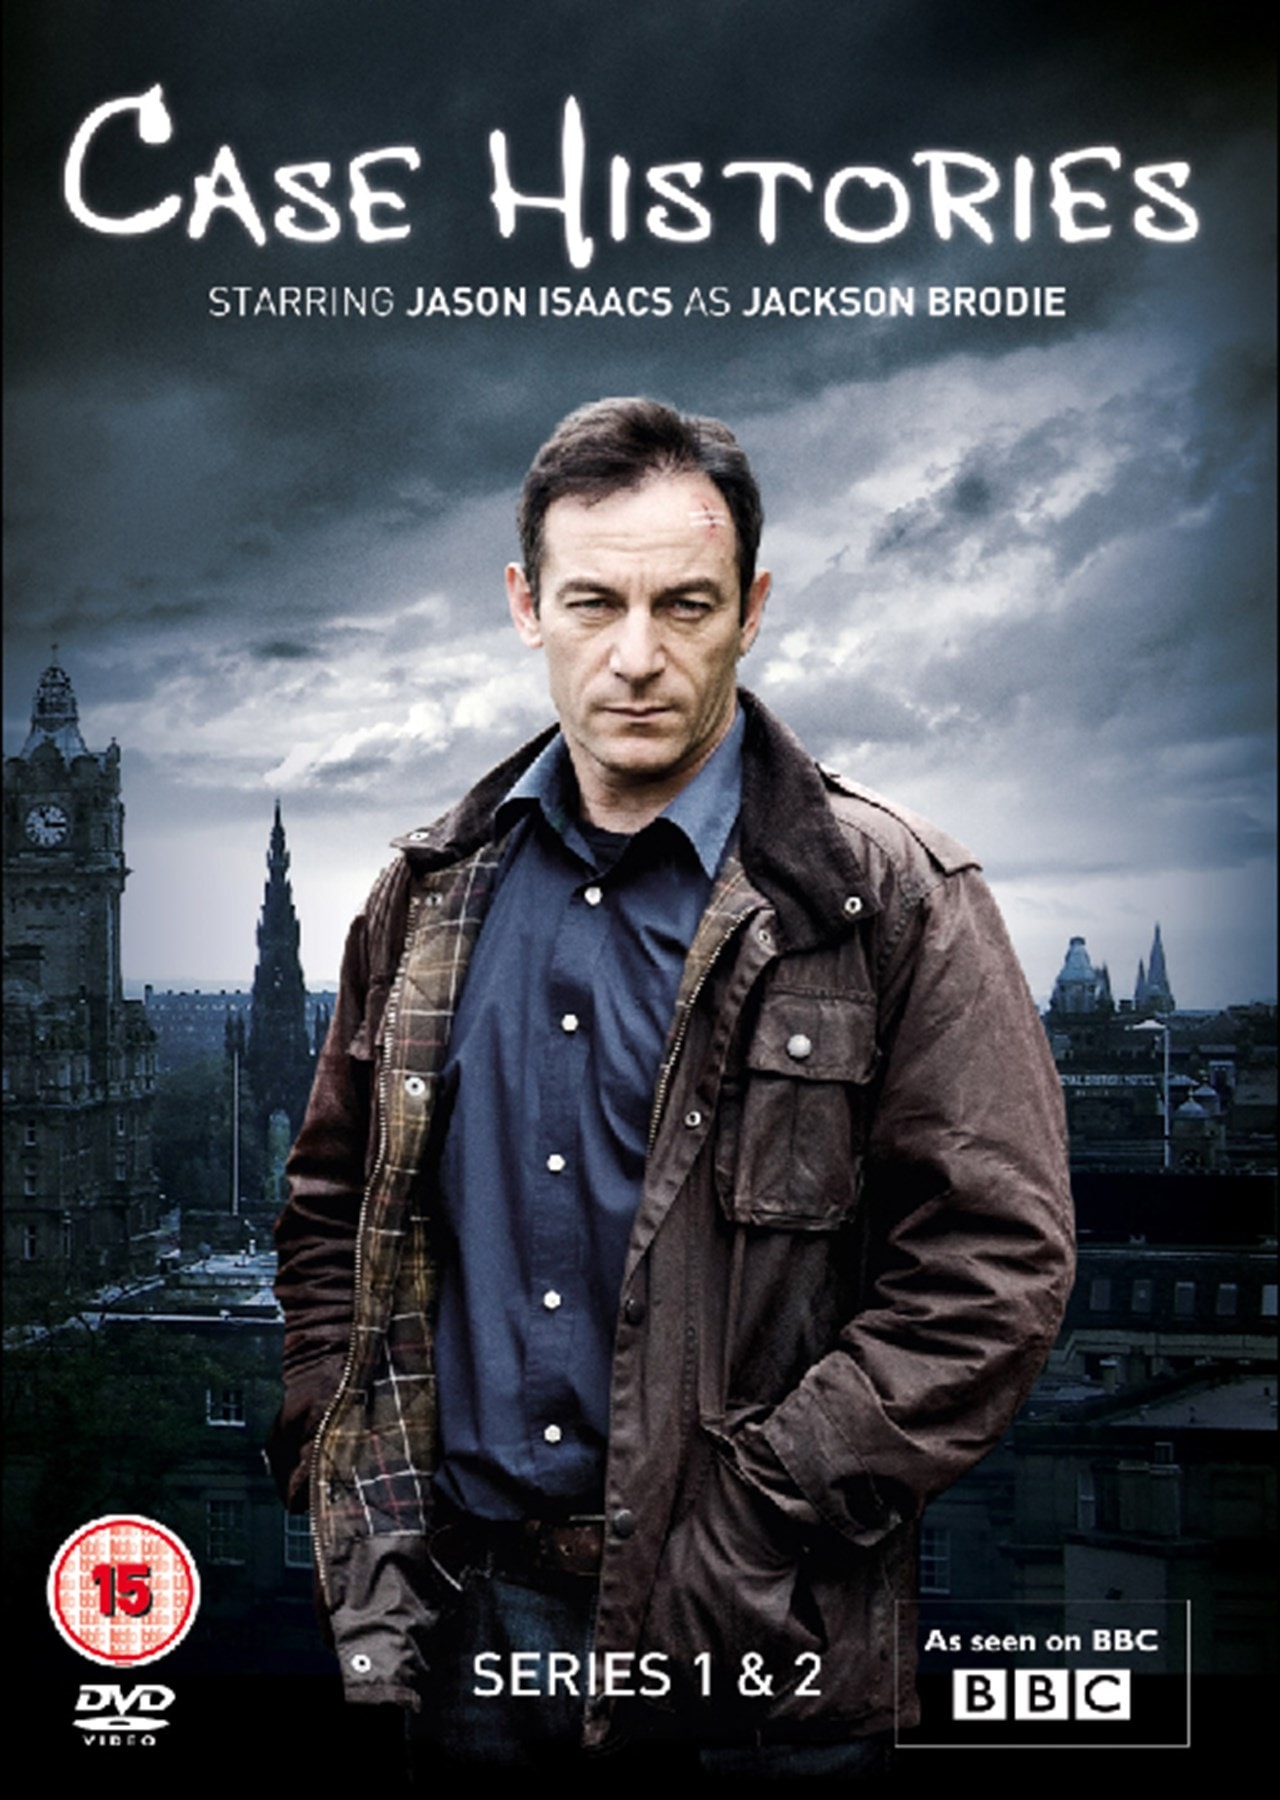 Case Histories Series 1 And 2 Dvd Box Set Free Shipping Over £20 Hmv Store